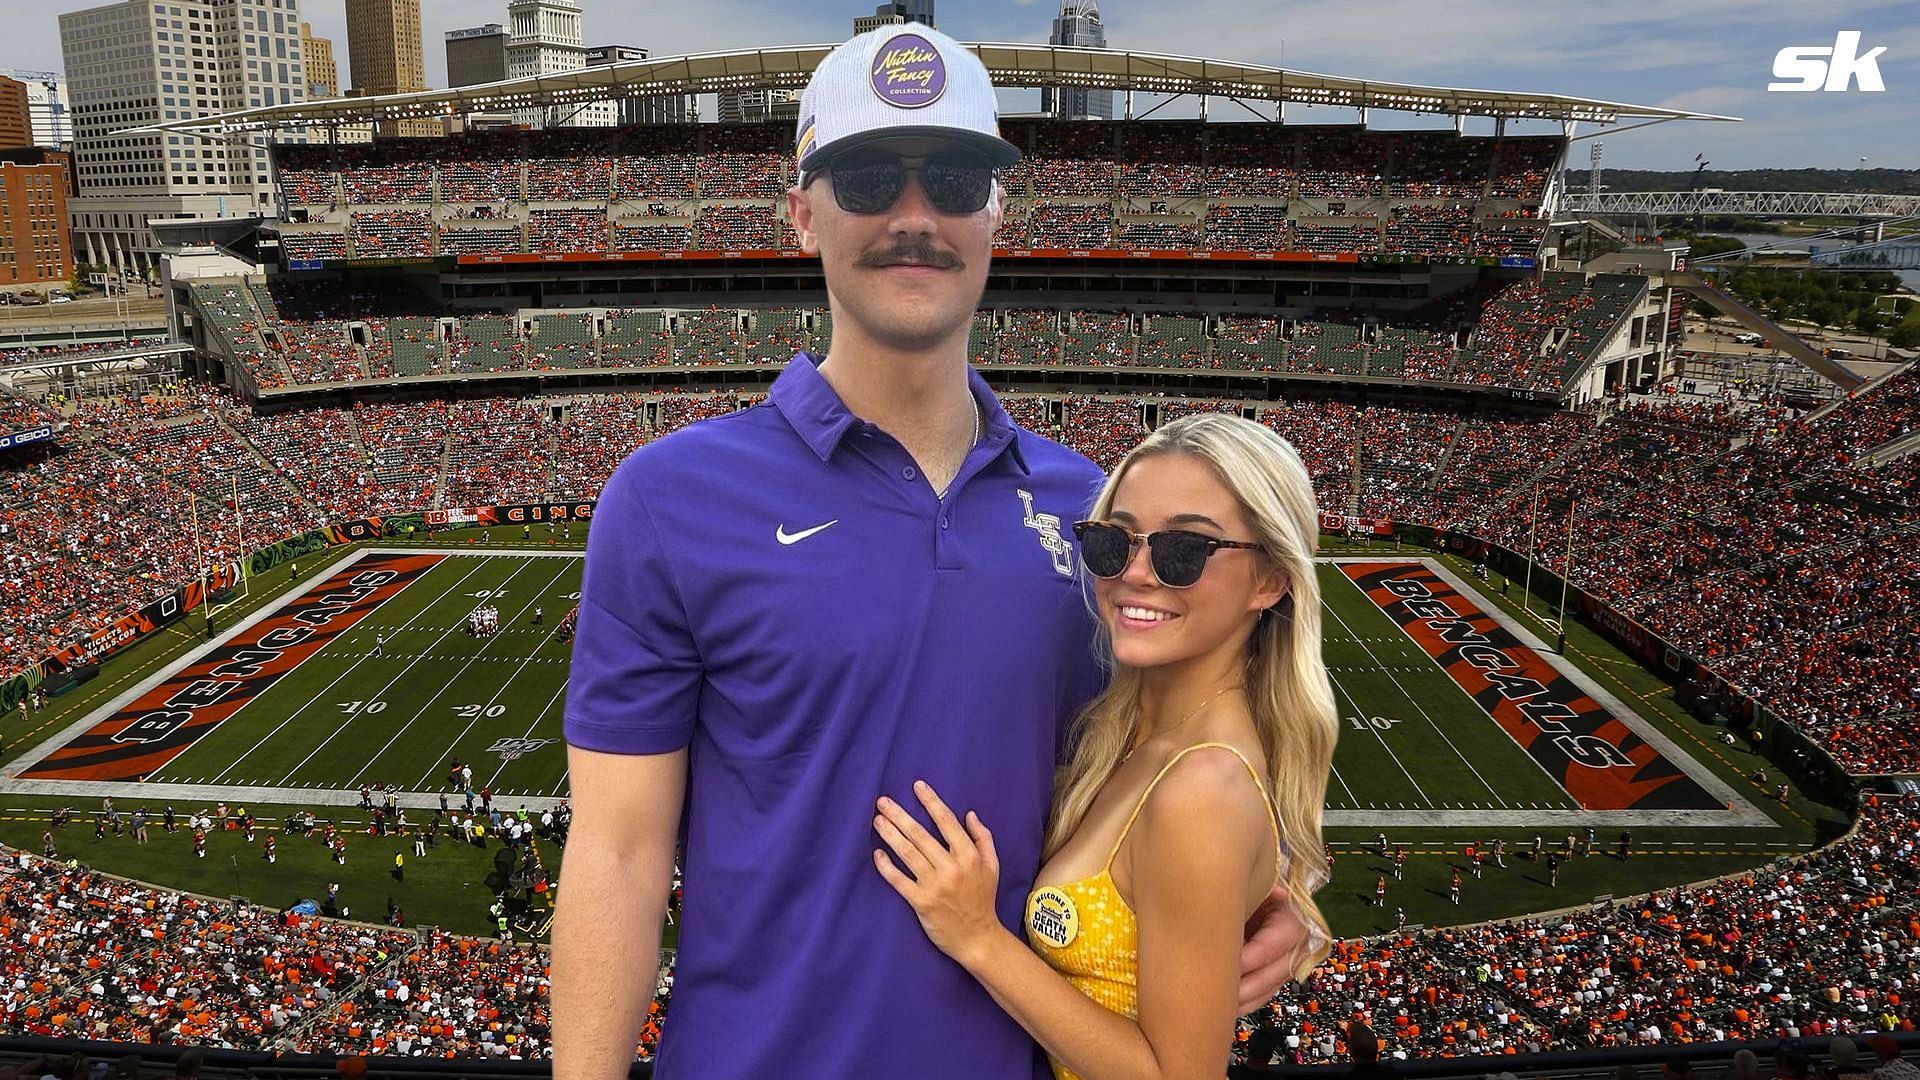 Olivia Dunne and boyfriend Paul Skenes like to focus on different elements of a football game